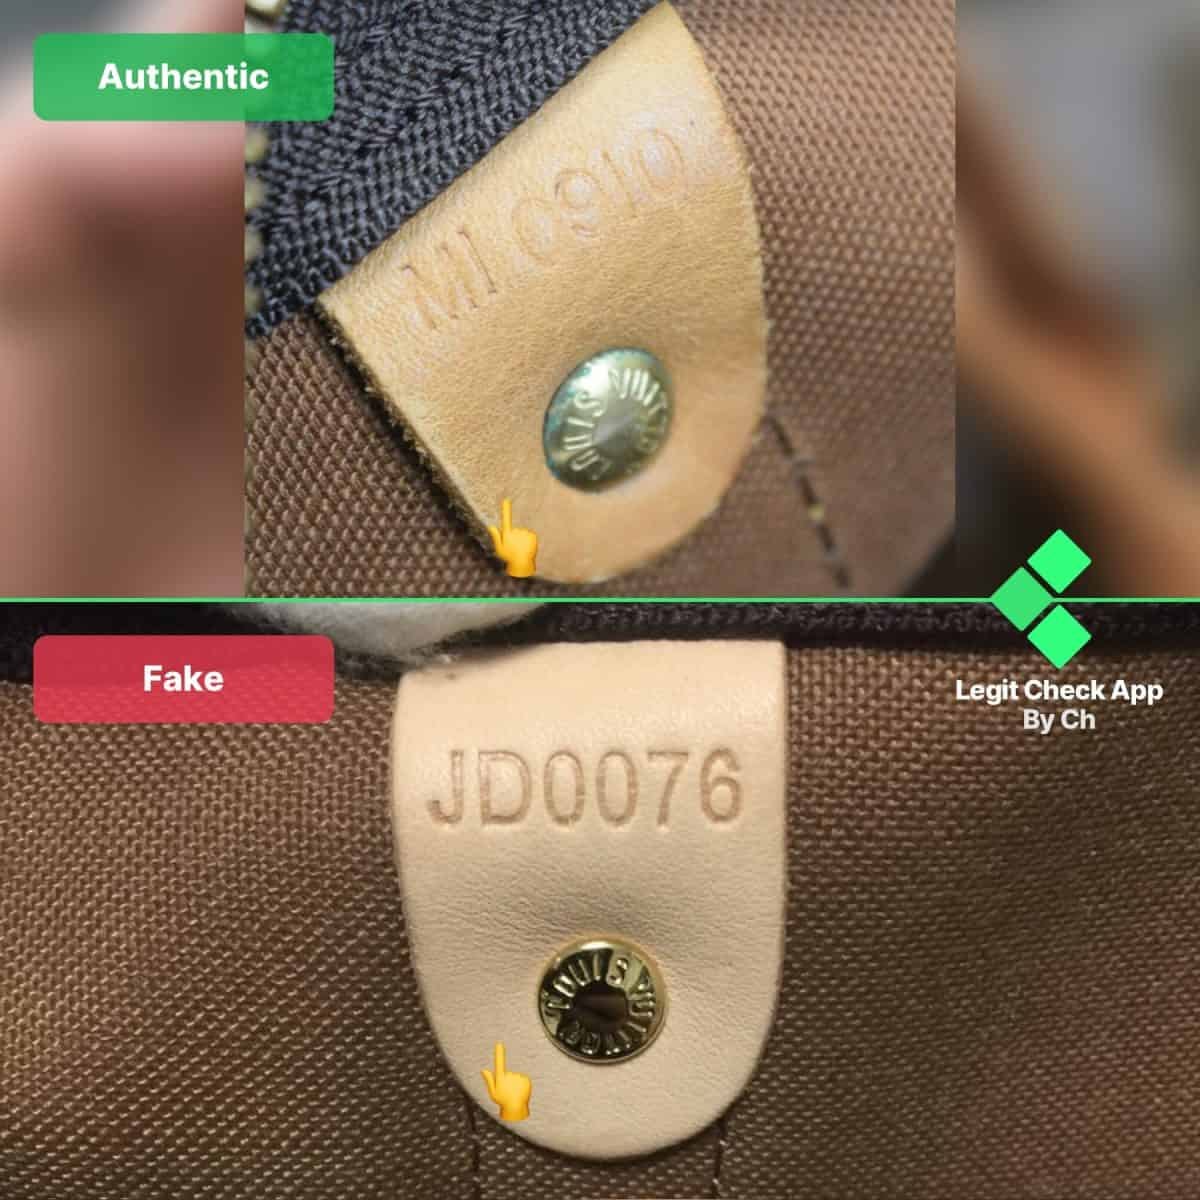 Real Vs Fake Louis Vuitton Keepall Monogram And Damier Guide